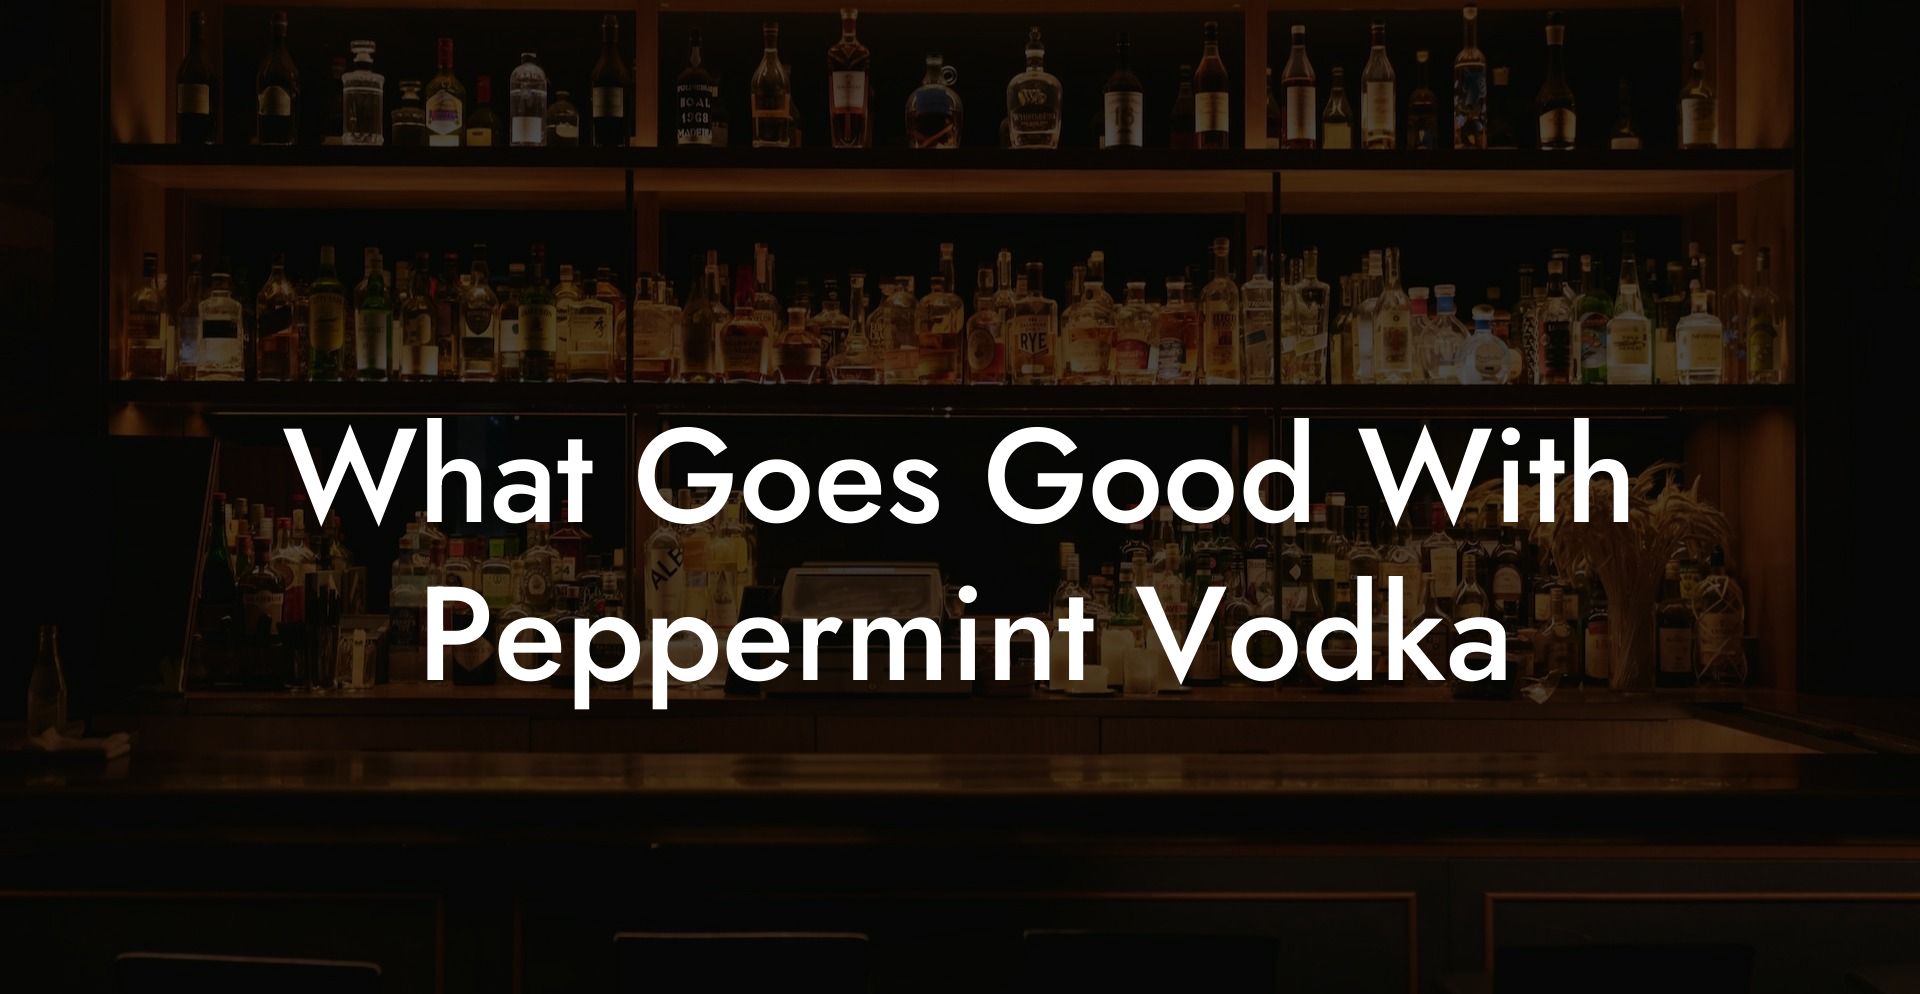 What Goes Good With Peppermint Vodka